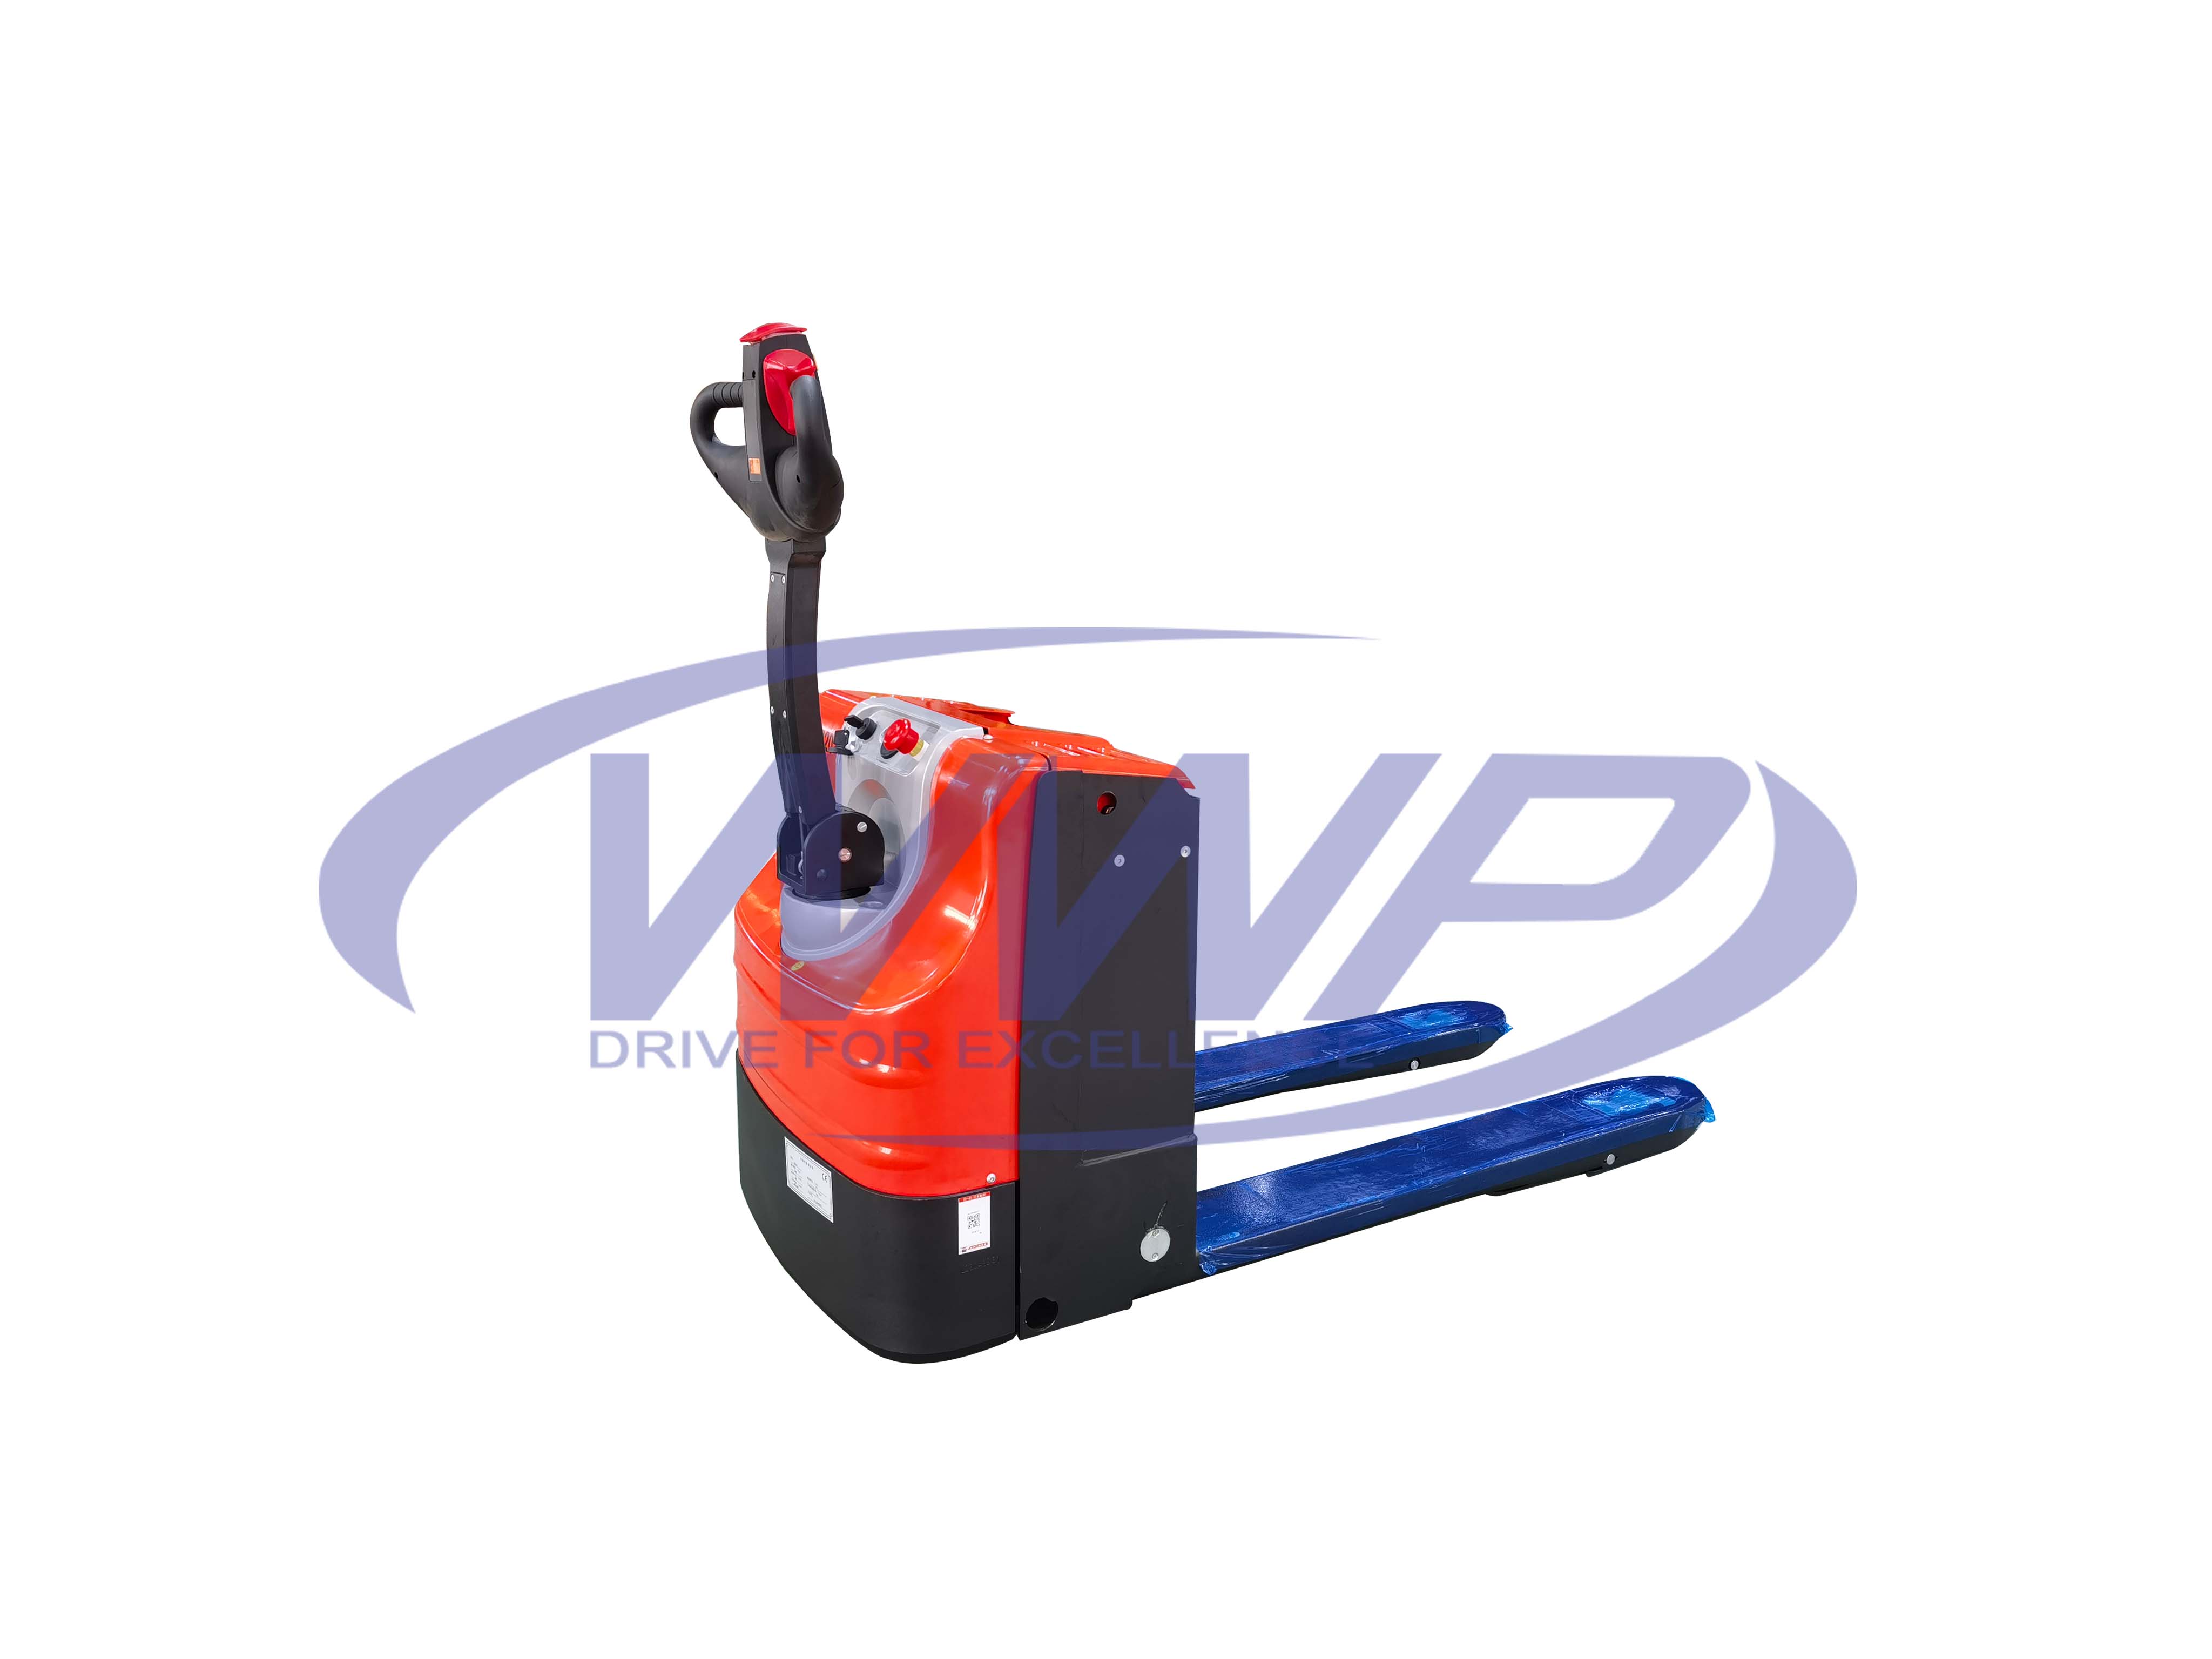 WWP Electric Pallet Truck Catalogue